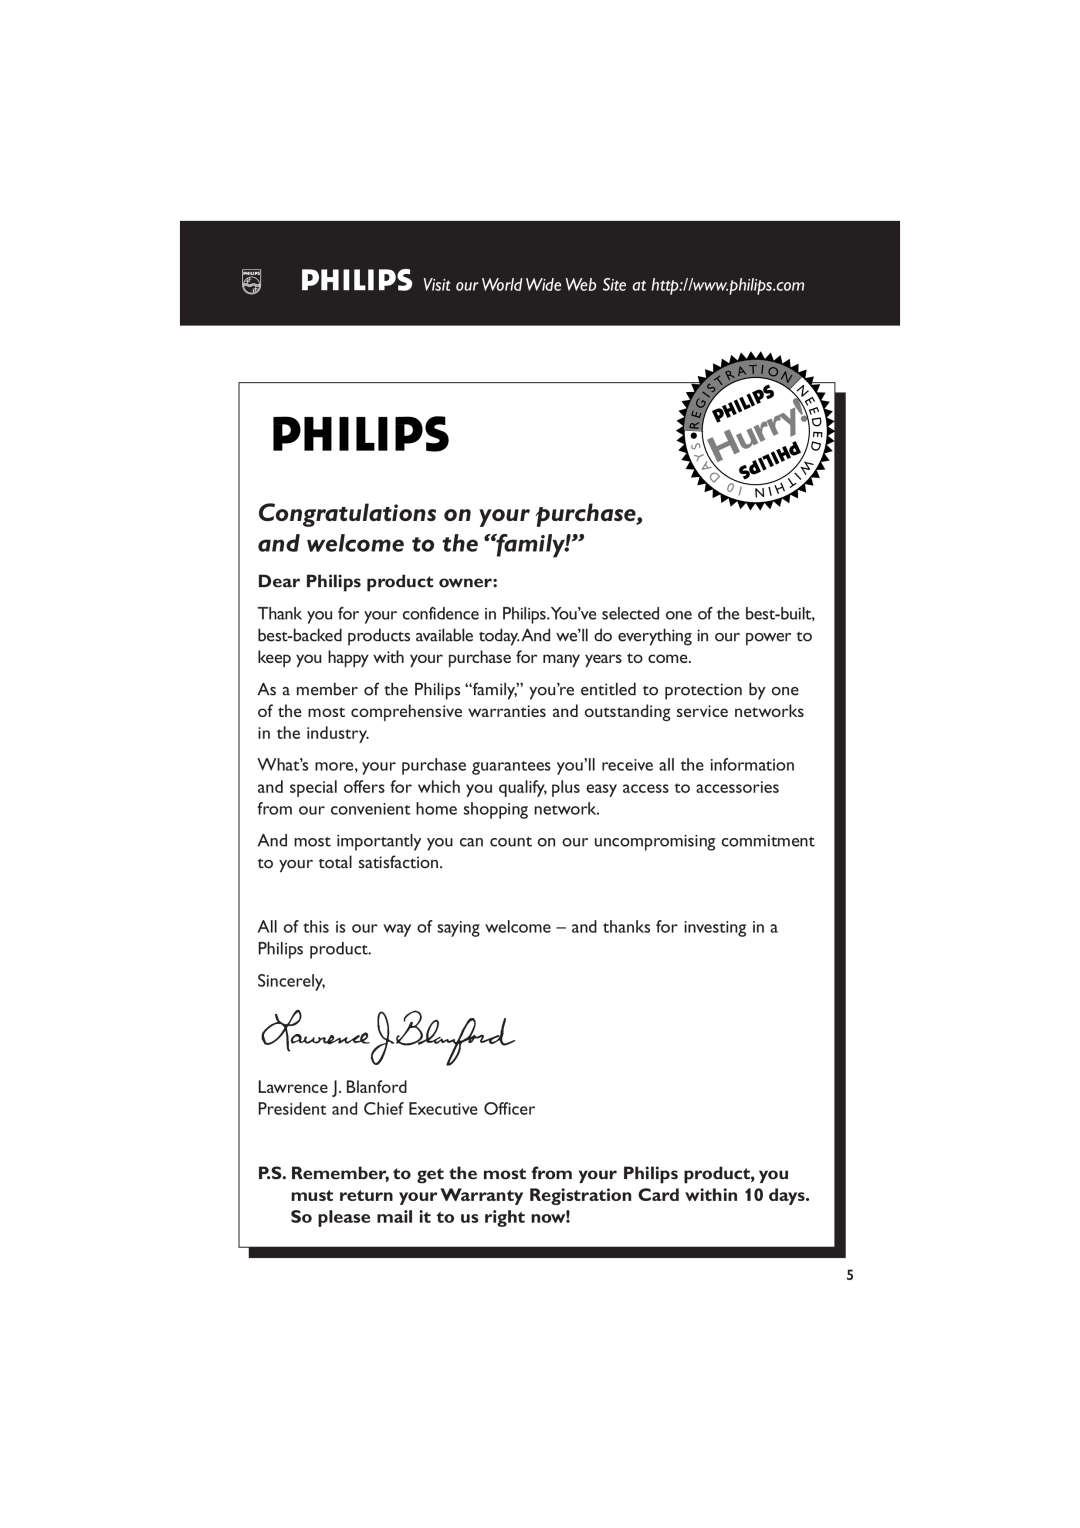 Philips MC-130 warranty Dear Philips product owner, Hurry 